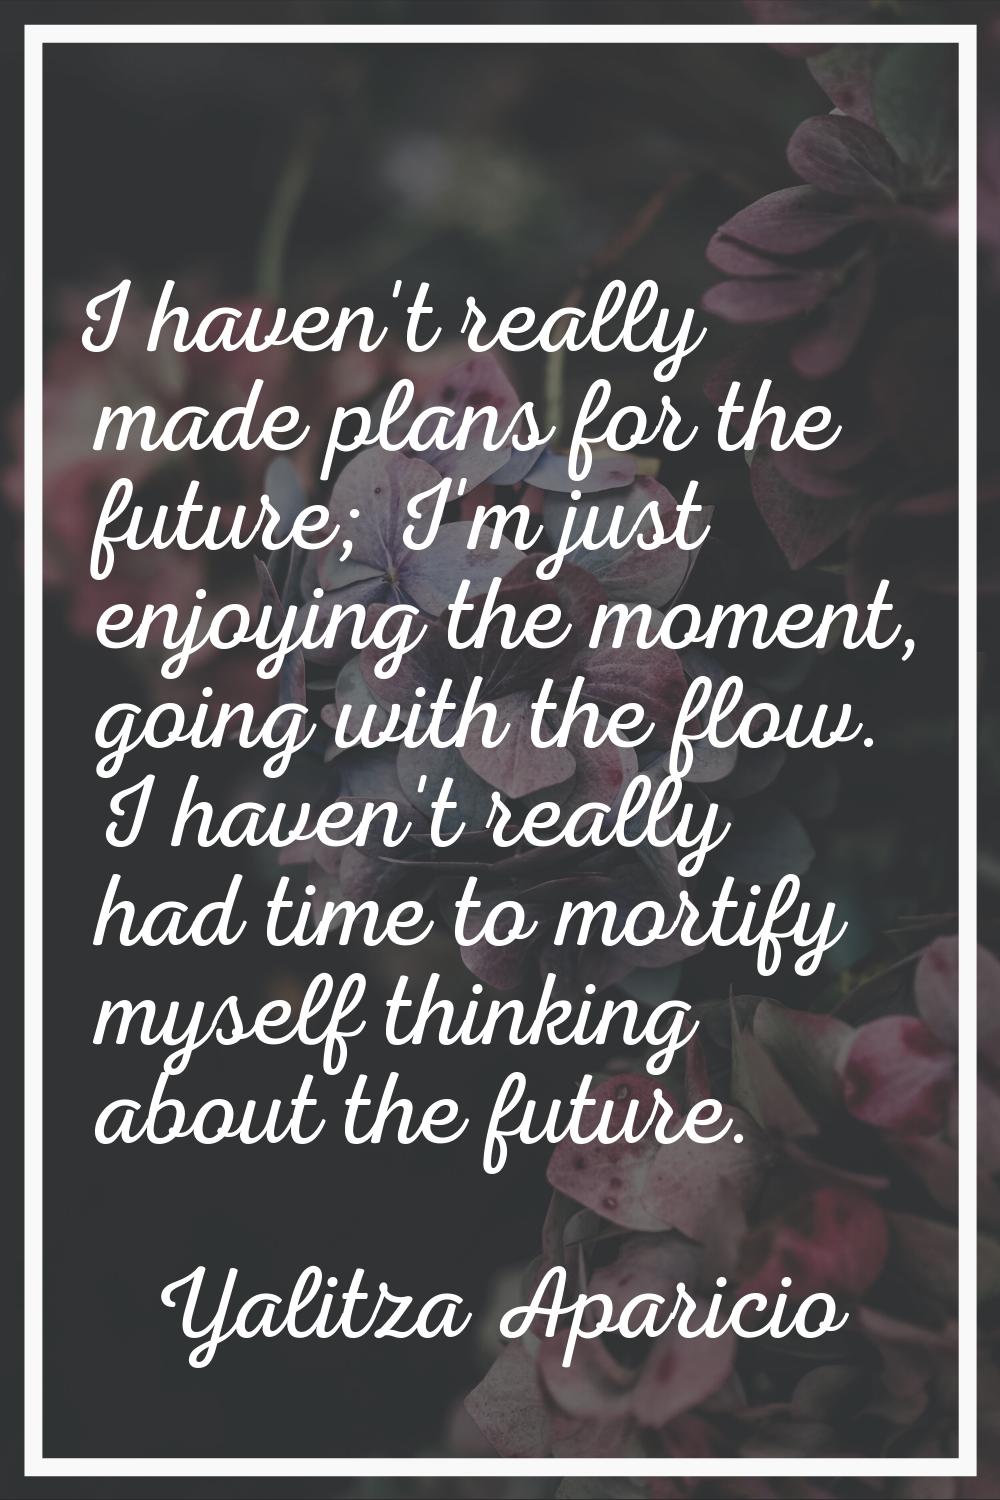 I haven't really made plans for the future; I'm just enjoying the moment, going with the flow. I ha